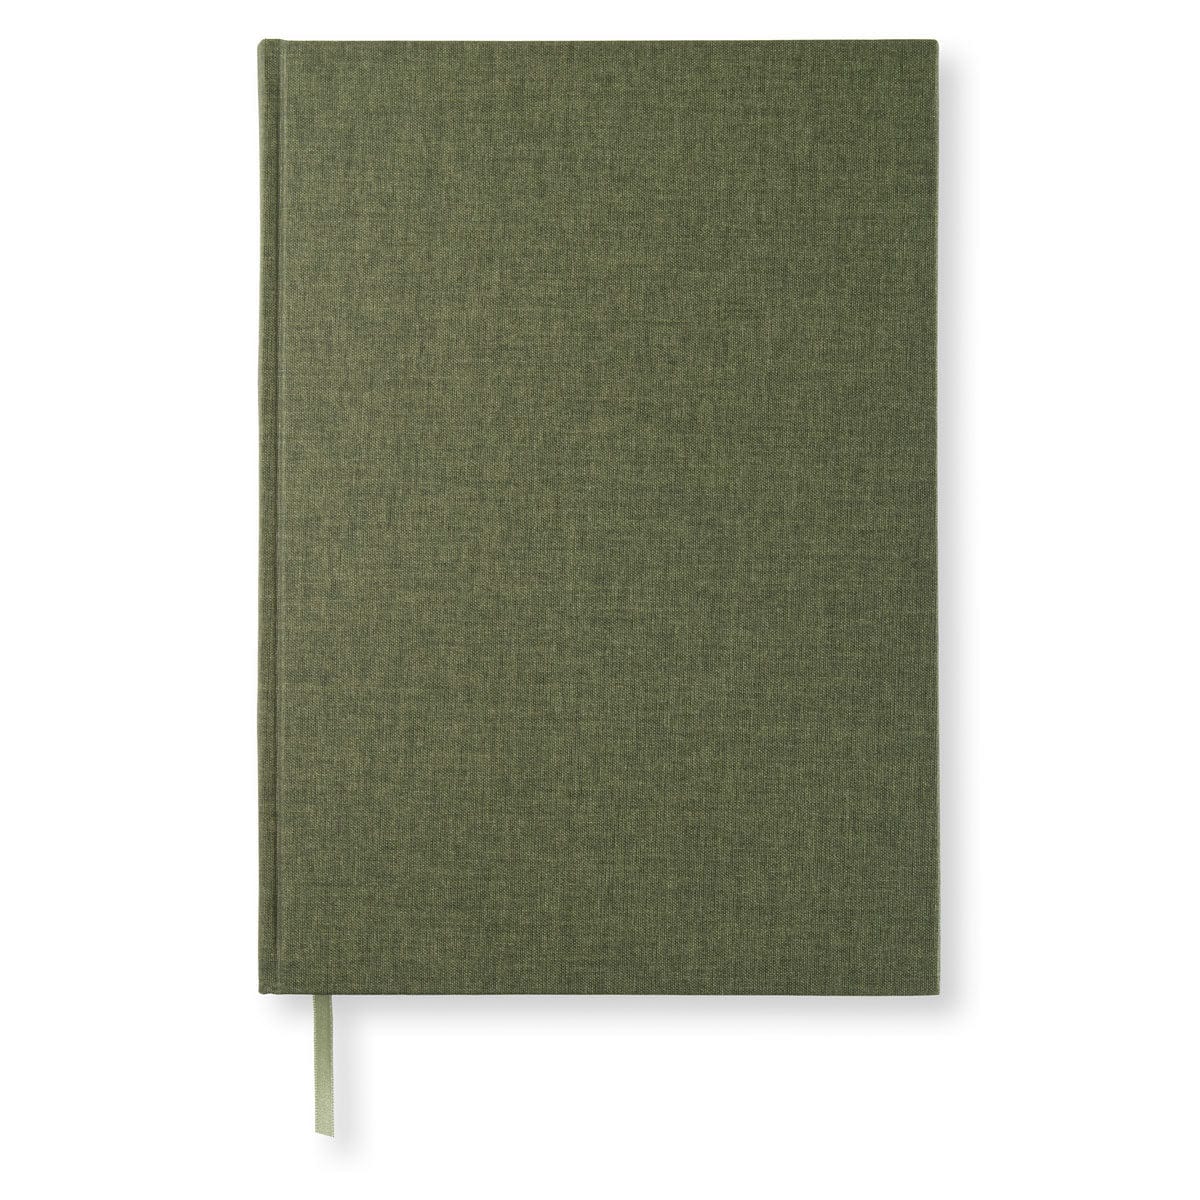 PaperStyle PS NOTEBOOK A4 Ruled Khaki Green